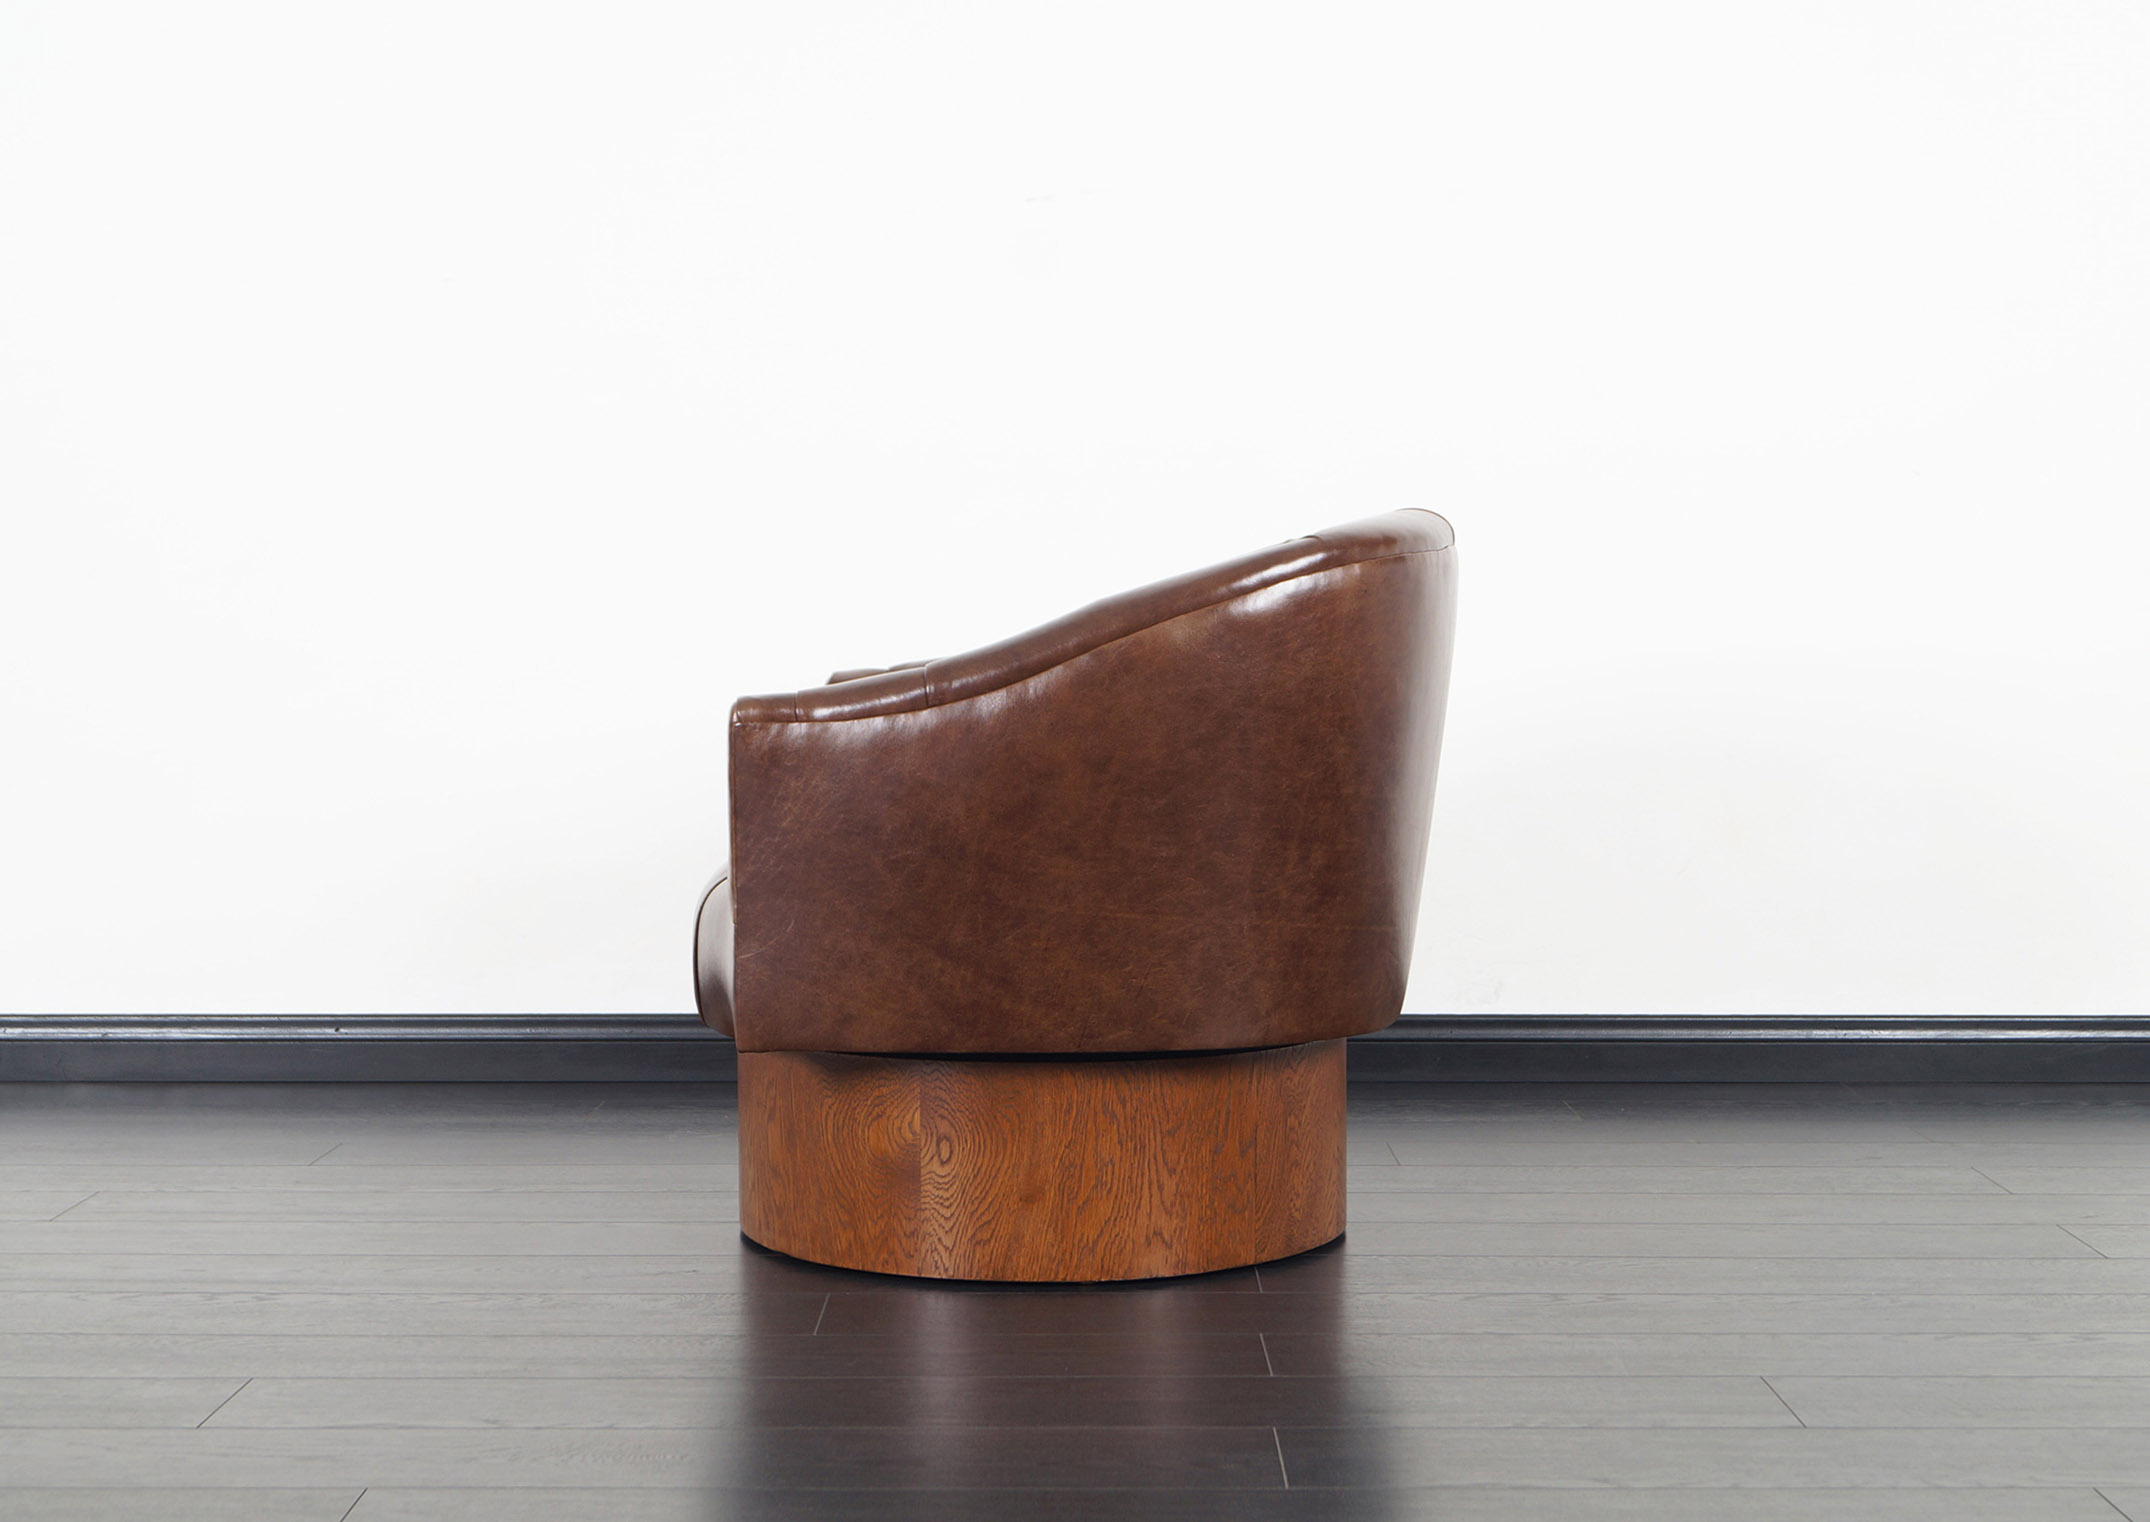 Vintage Leather Swivel Lounge Chairs by Milo Baughman